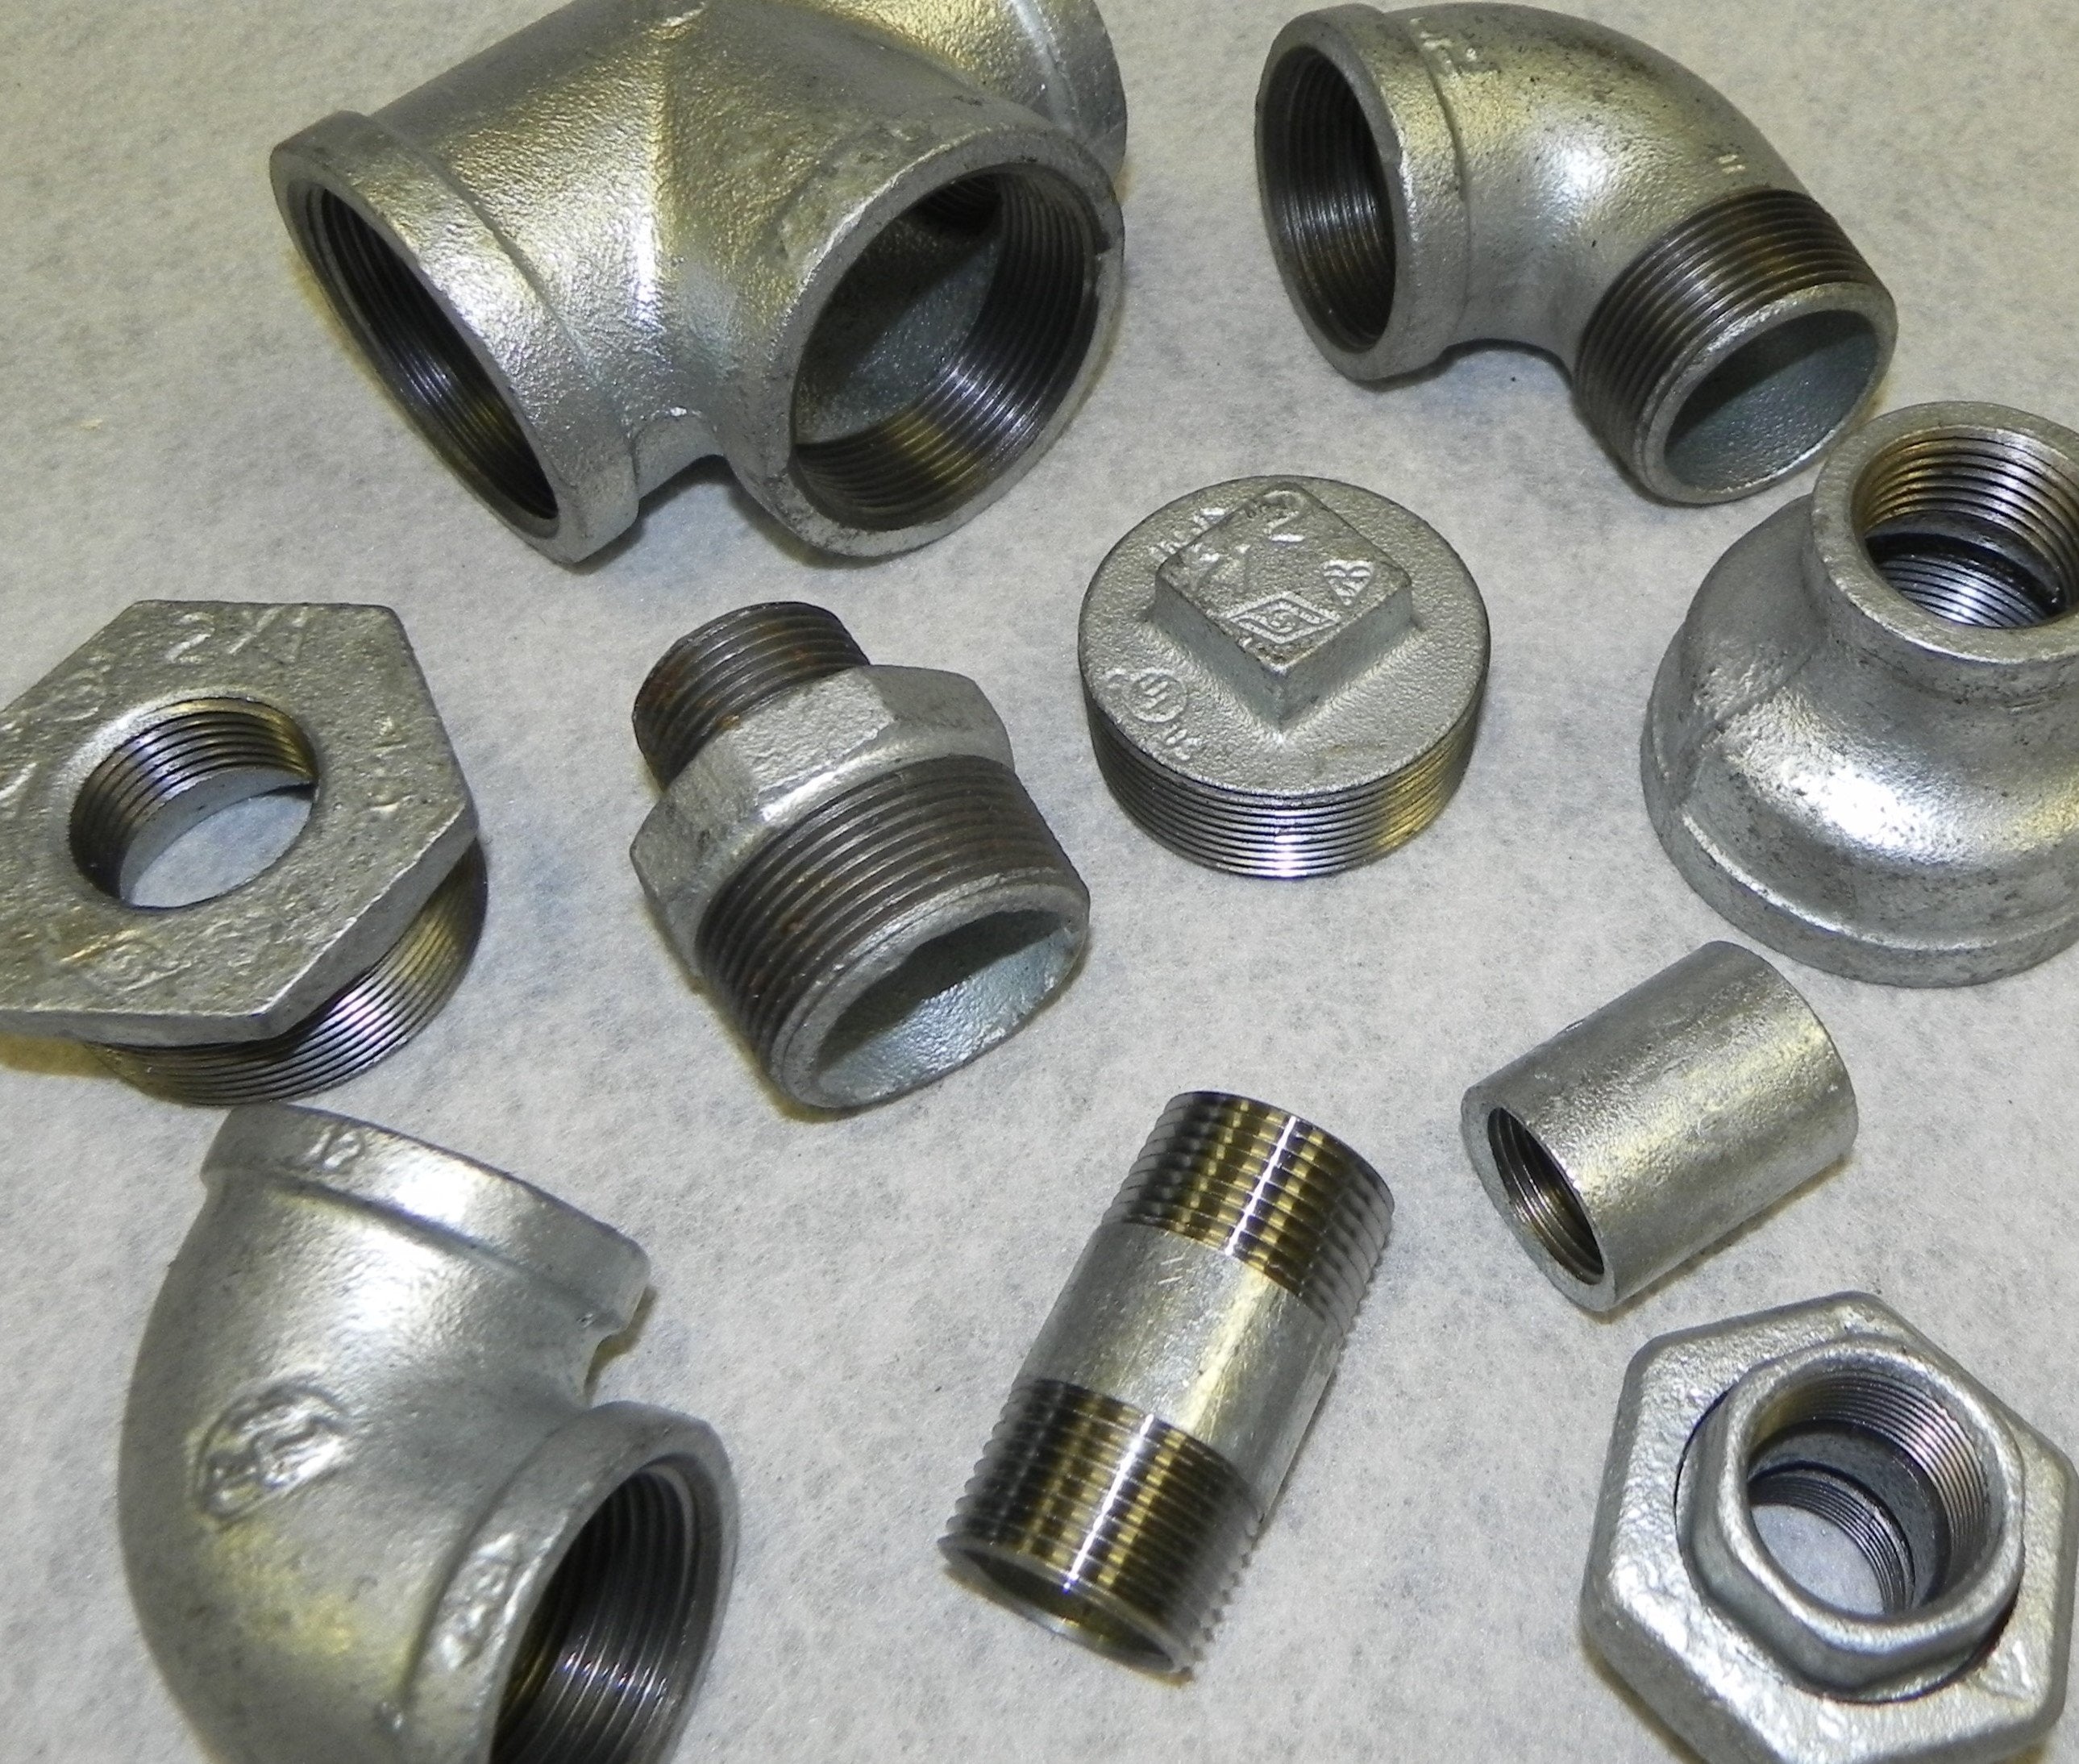 Stainless Steel Pipe Fittings Outlet Discounts, Save 67% | jlcatj.gob.mx